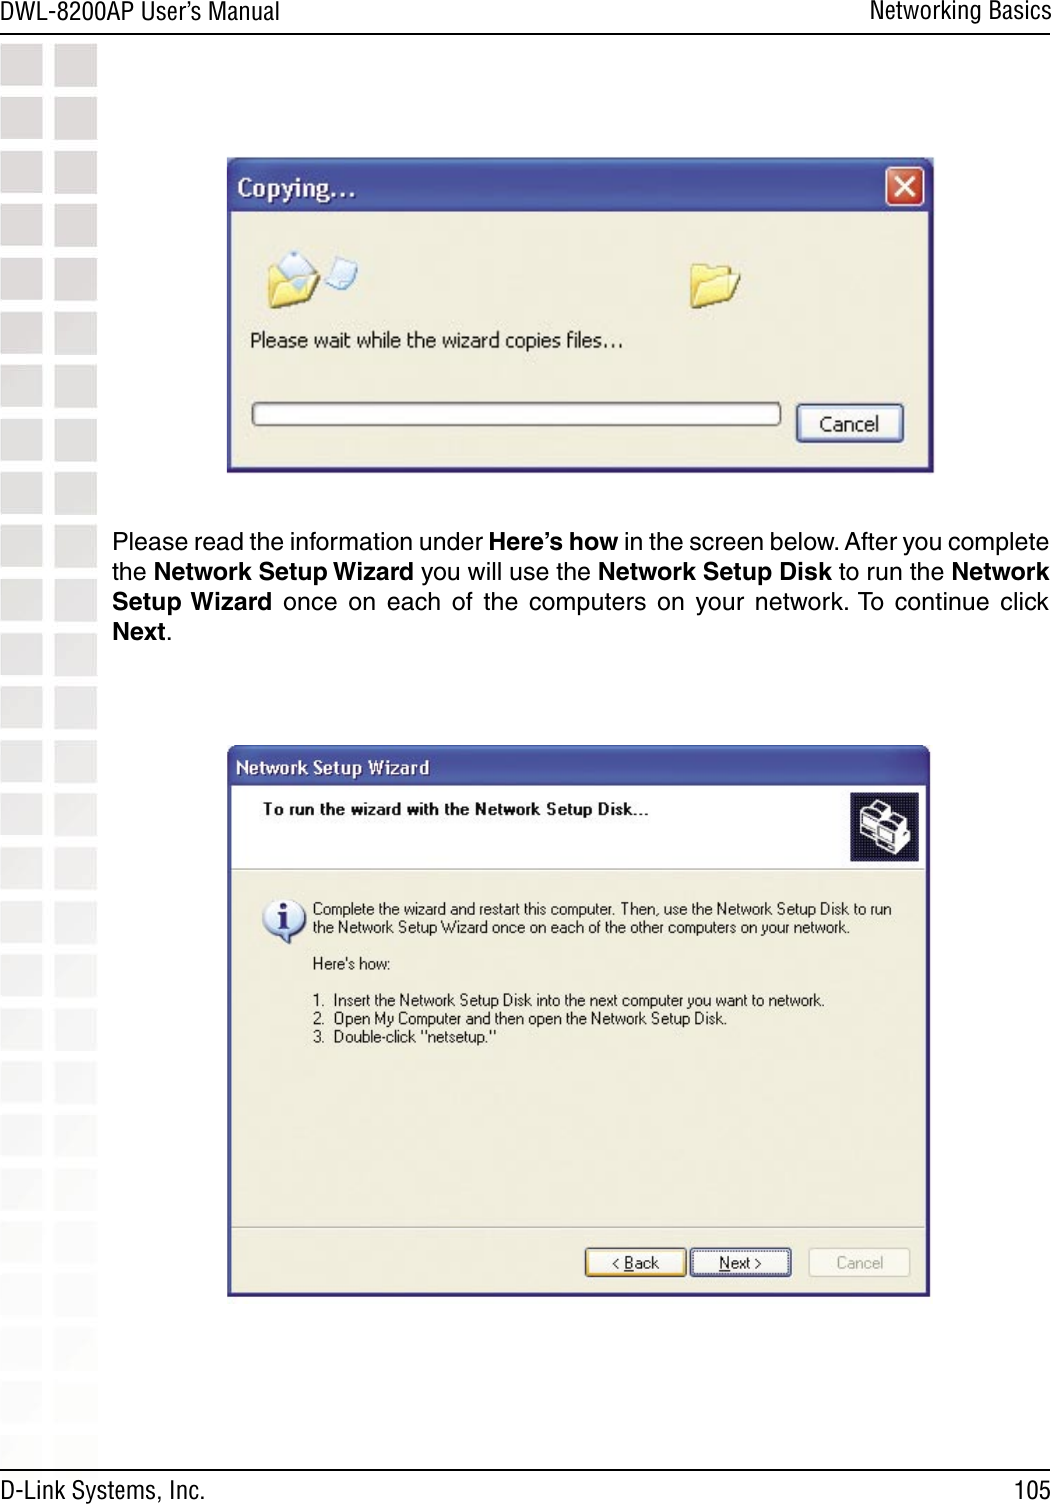 105DWL-8200AP User’s ManualD-Link Systems, Inc.Networking BasicsPlease read the information under Here’s how in the screen below. After you complete the Network Setup Wizard you will use the Network Setup Disk to run the Network Setup Wizard  once  on  each  of  the  computers  on  your  network. To  continue  click Next. 